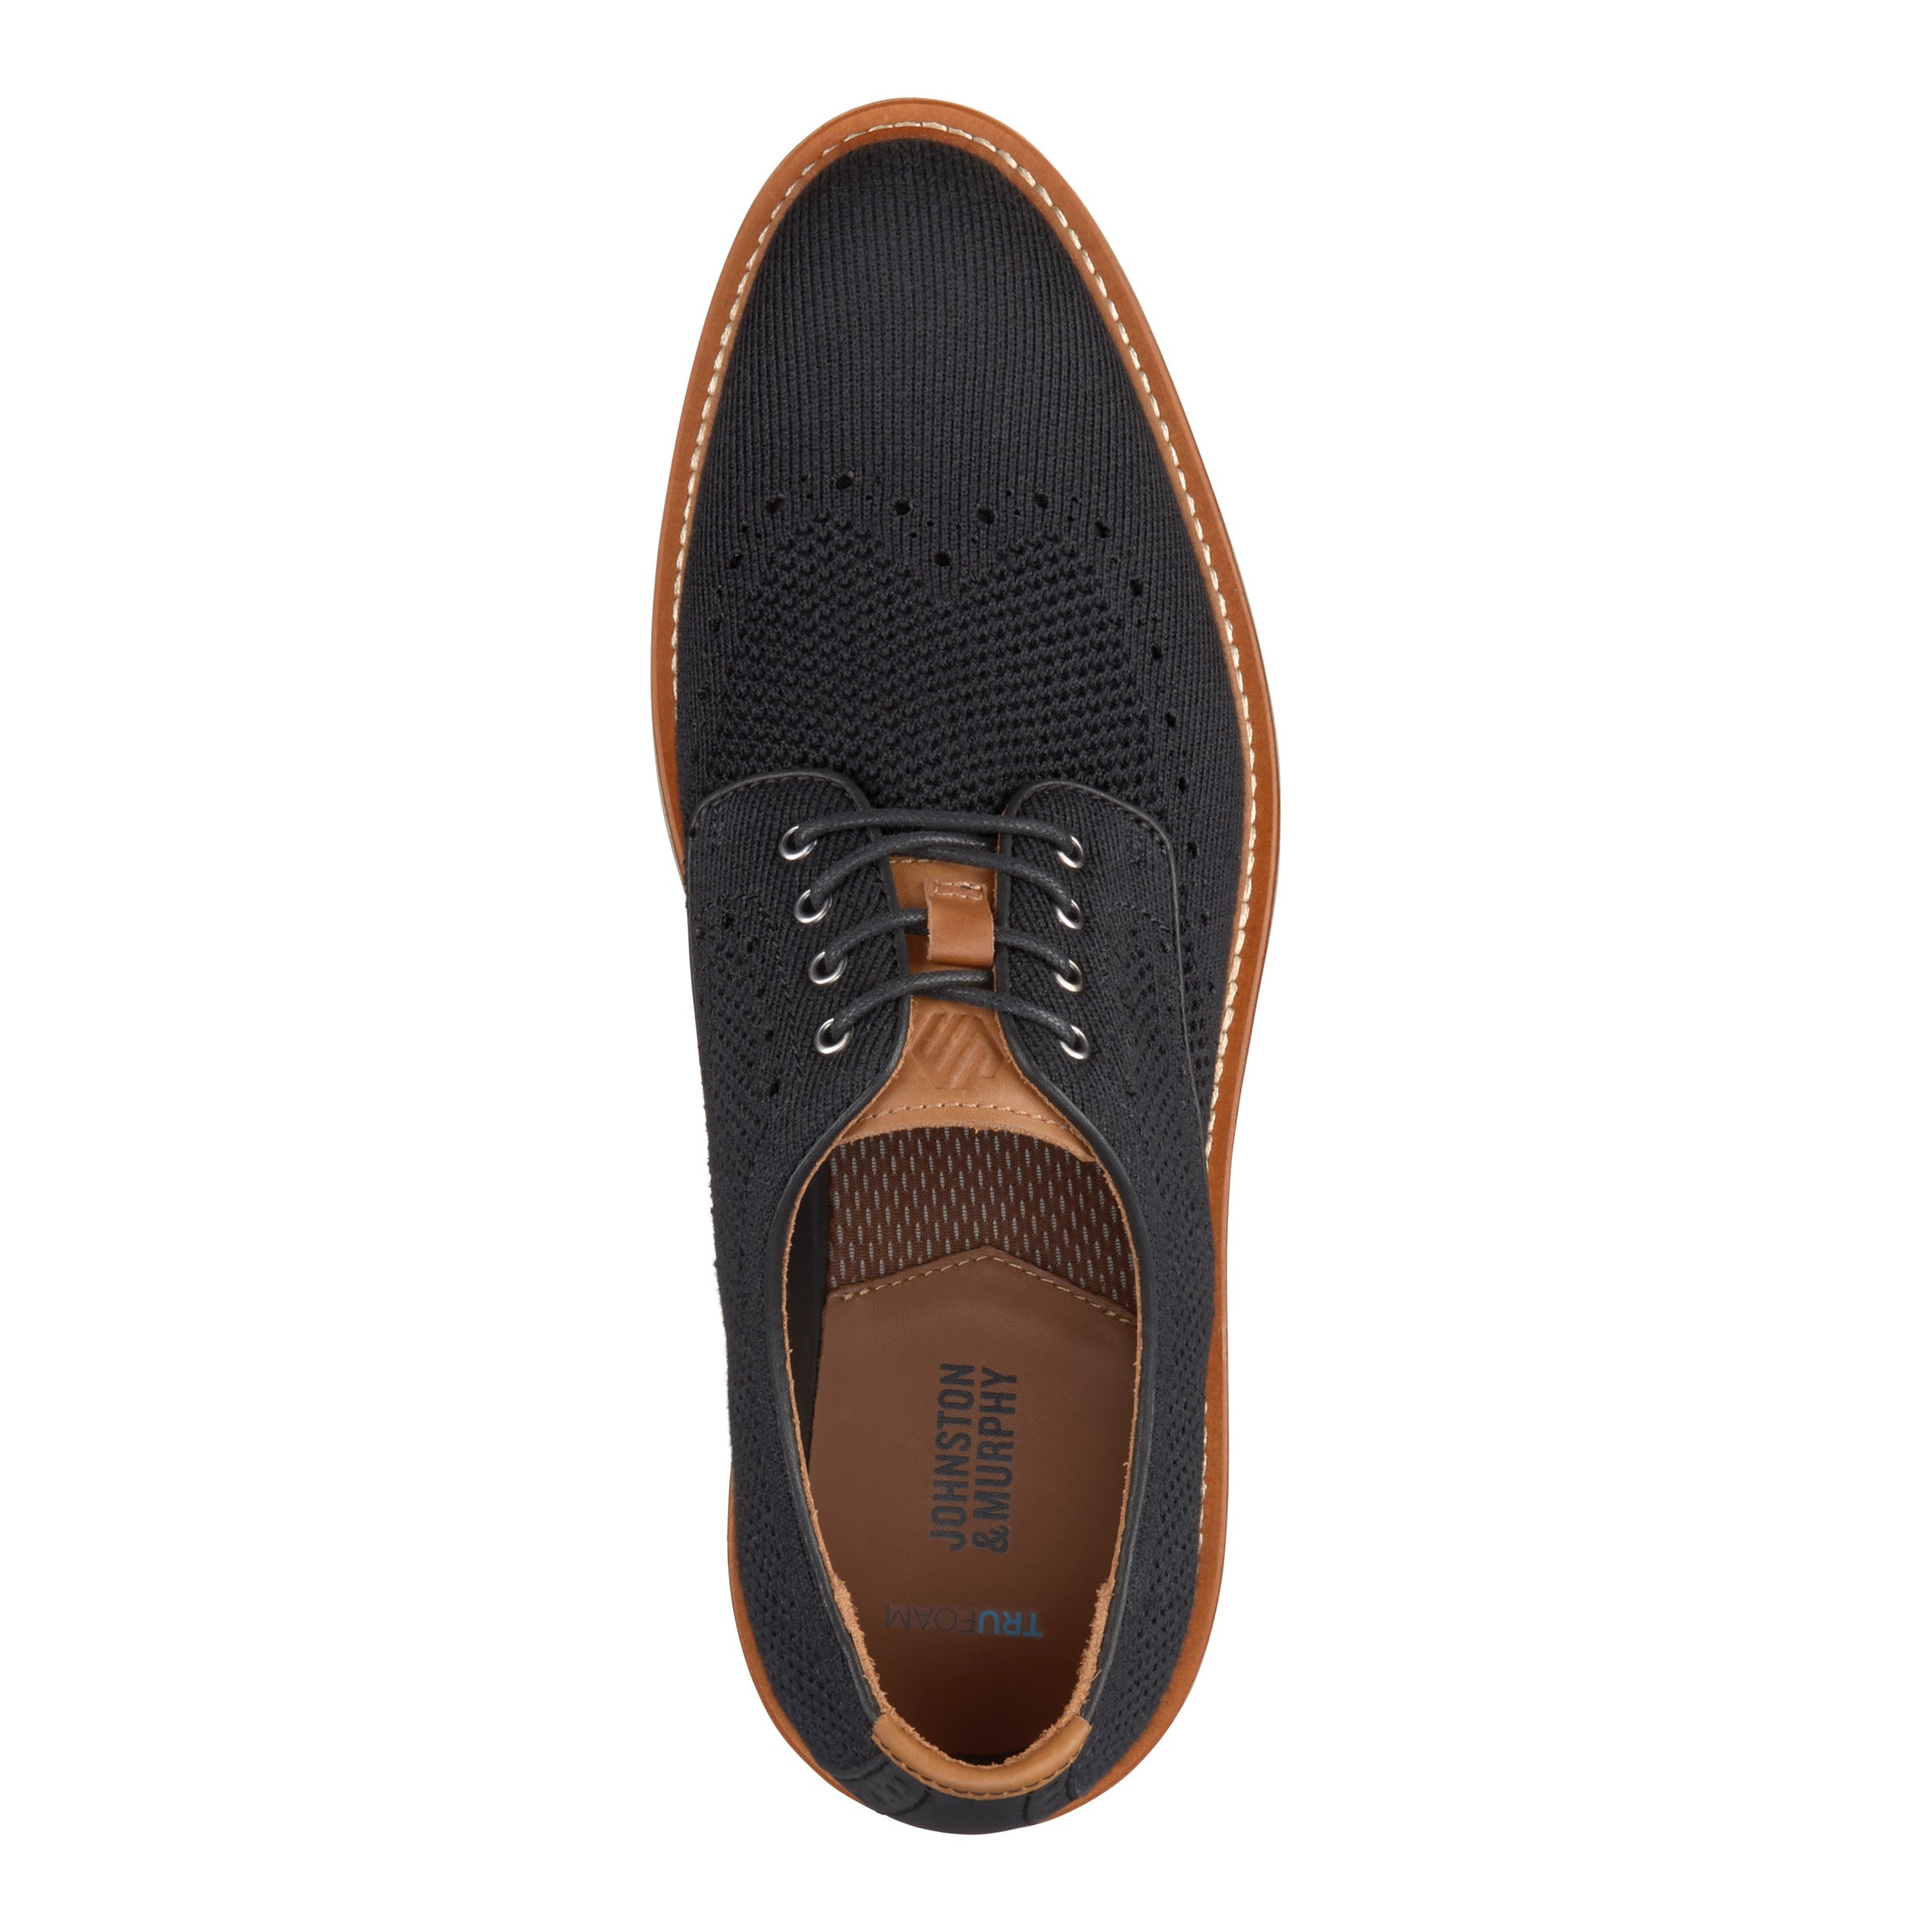 Incredibly light and flexible in airy knit with leather trim. Refined details including double-stitched leather welt, vachetta leather accents, and contrast welt stitching.  Leather/anti-microbial mesh lining.  Removable, molded memory-foam cushioned insole.  TRUFOAM sole for lightweight comfort.